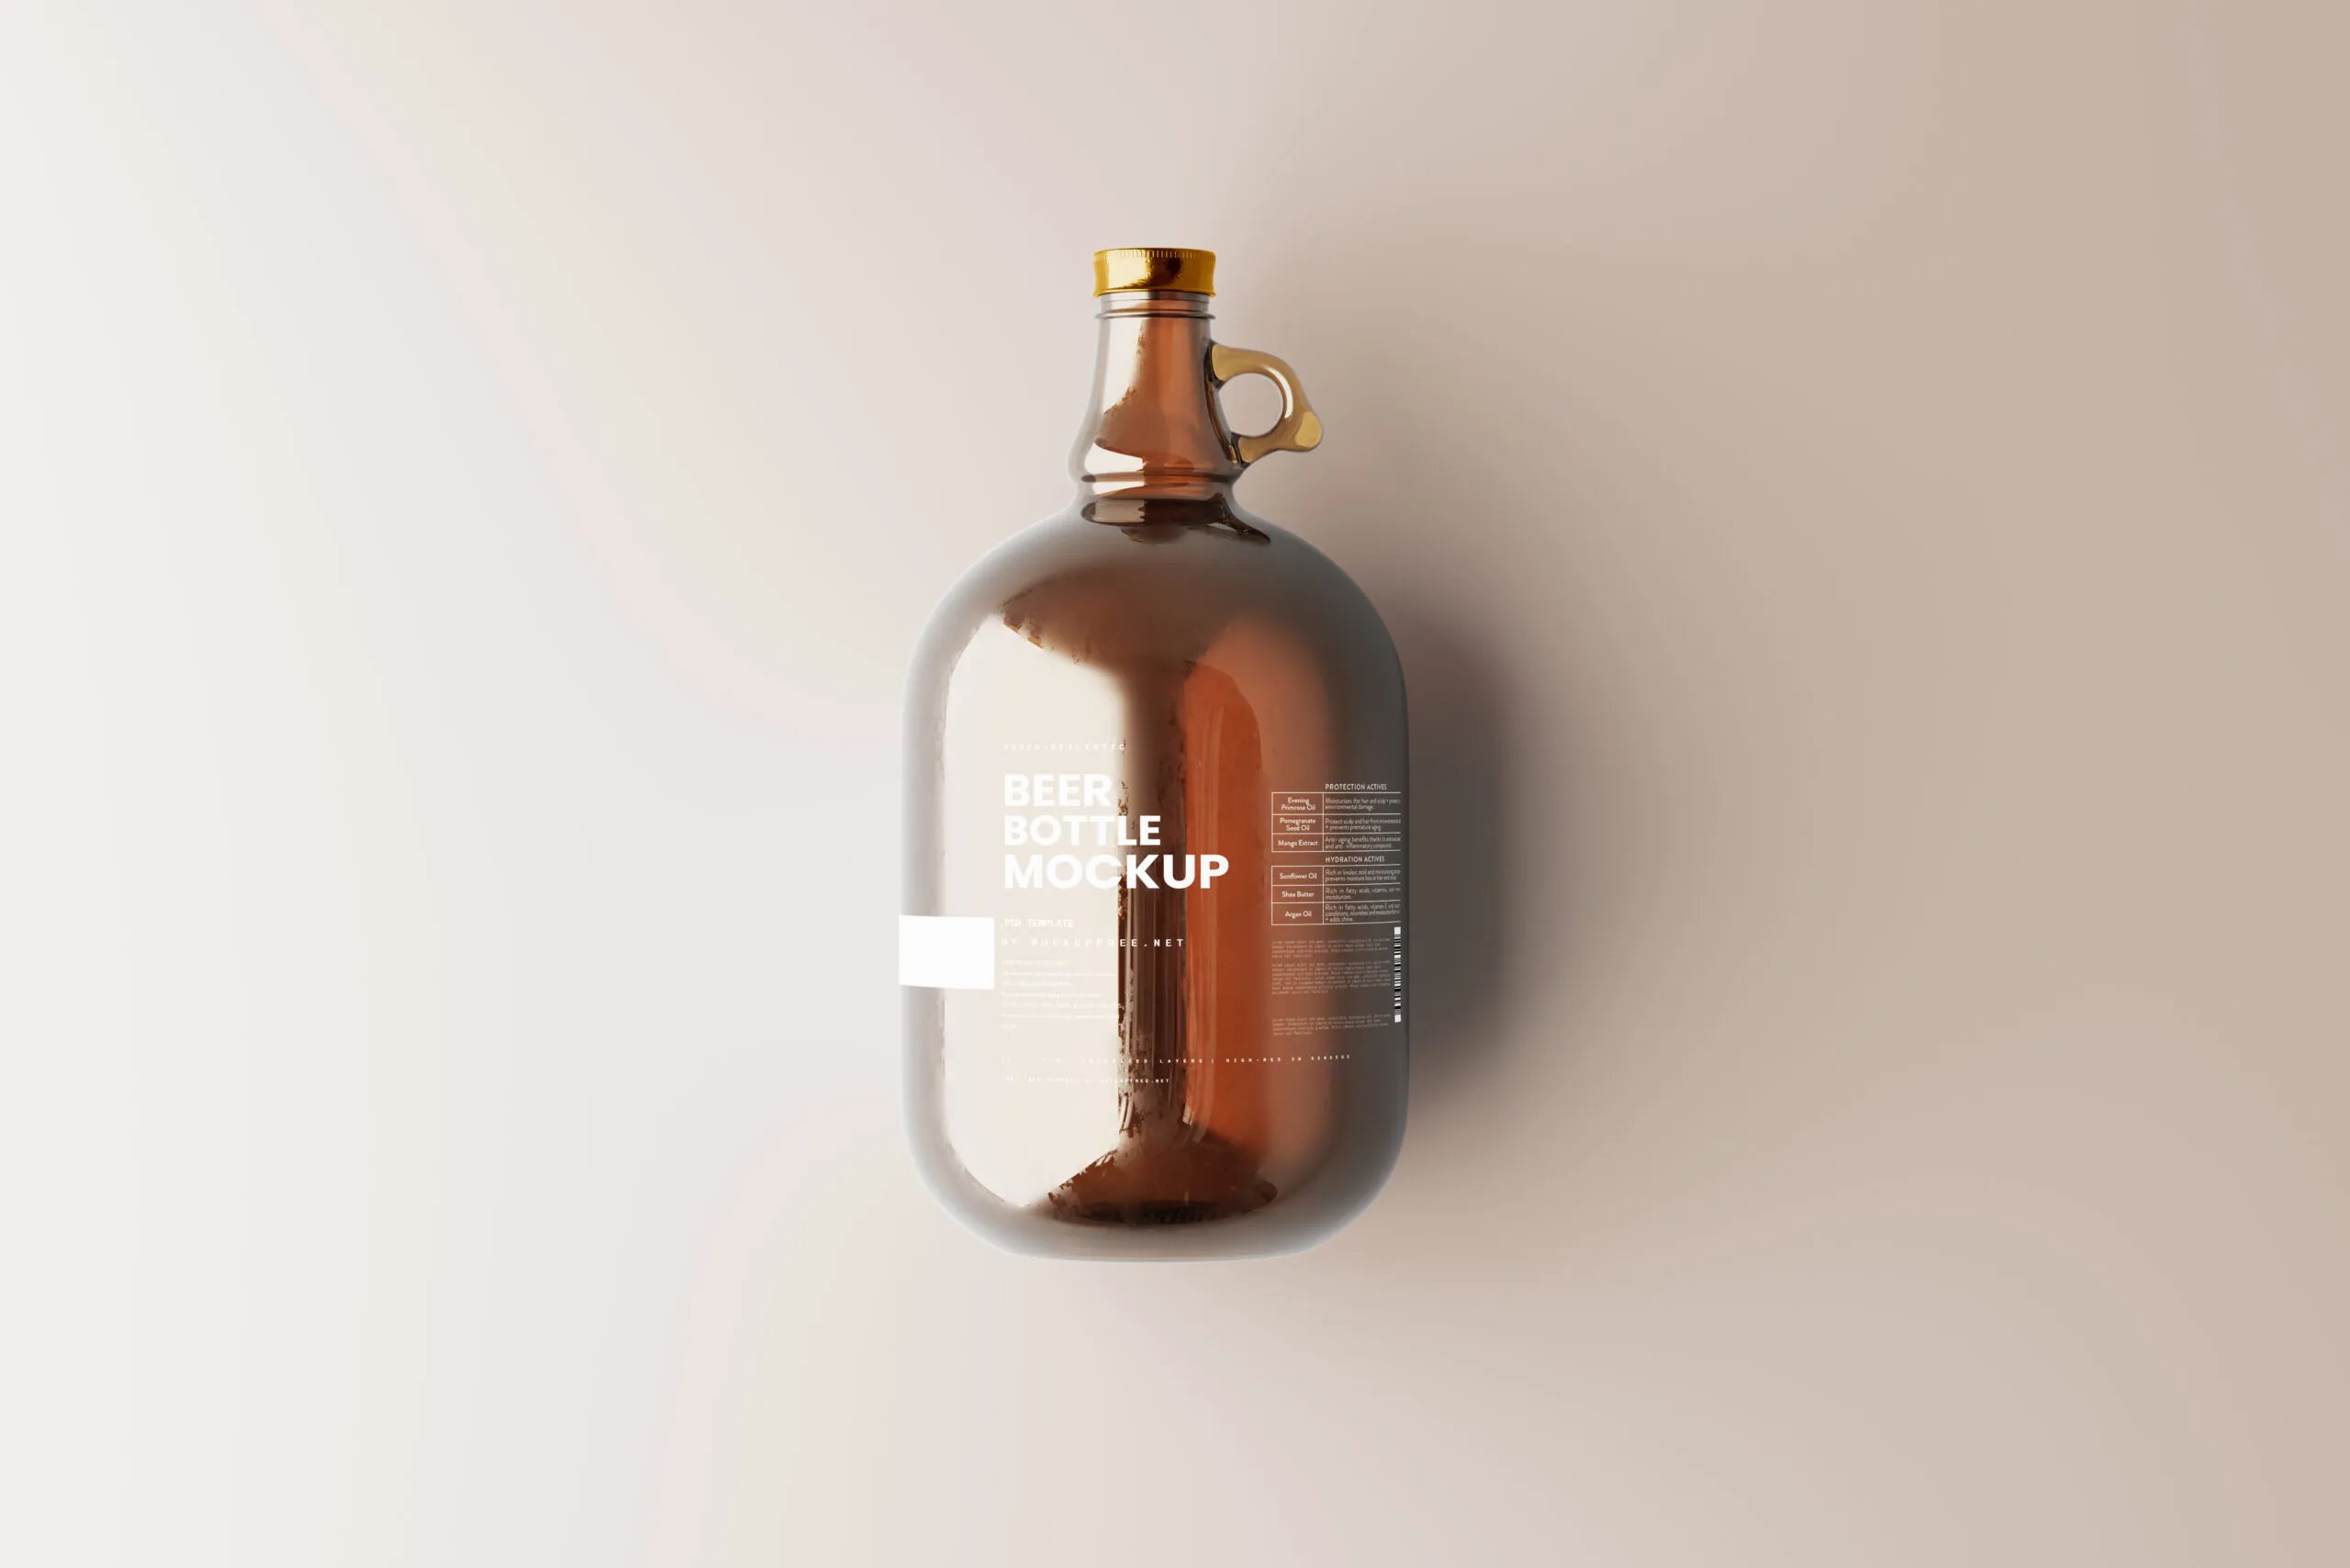 5 Shots of Amber Glass Beer Bottle Mockup with Handle FREE PSD